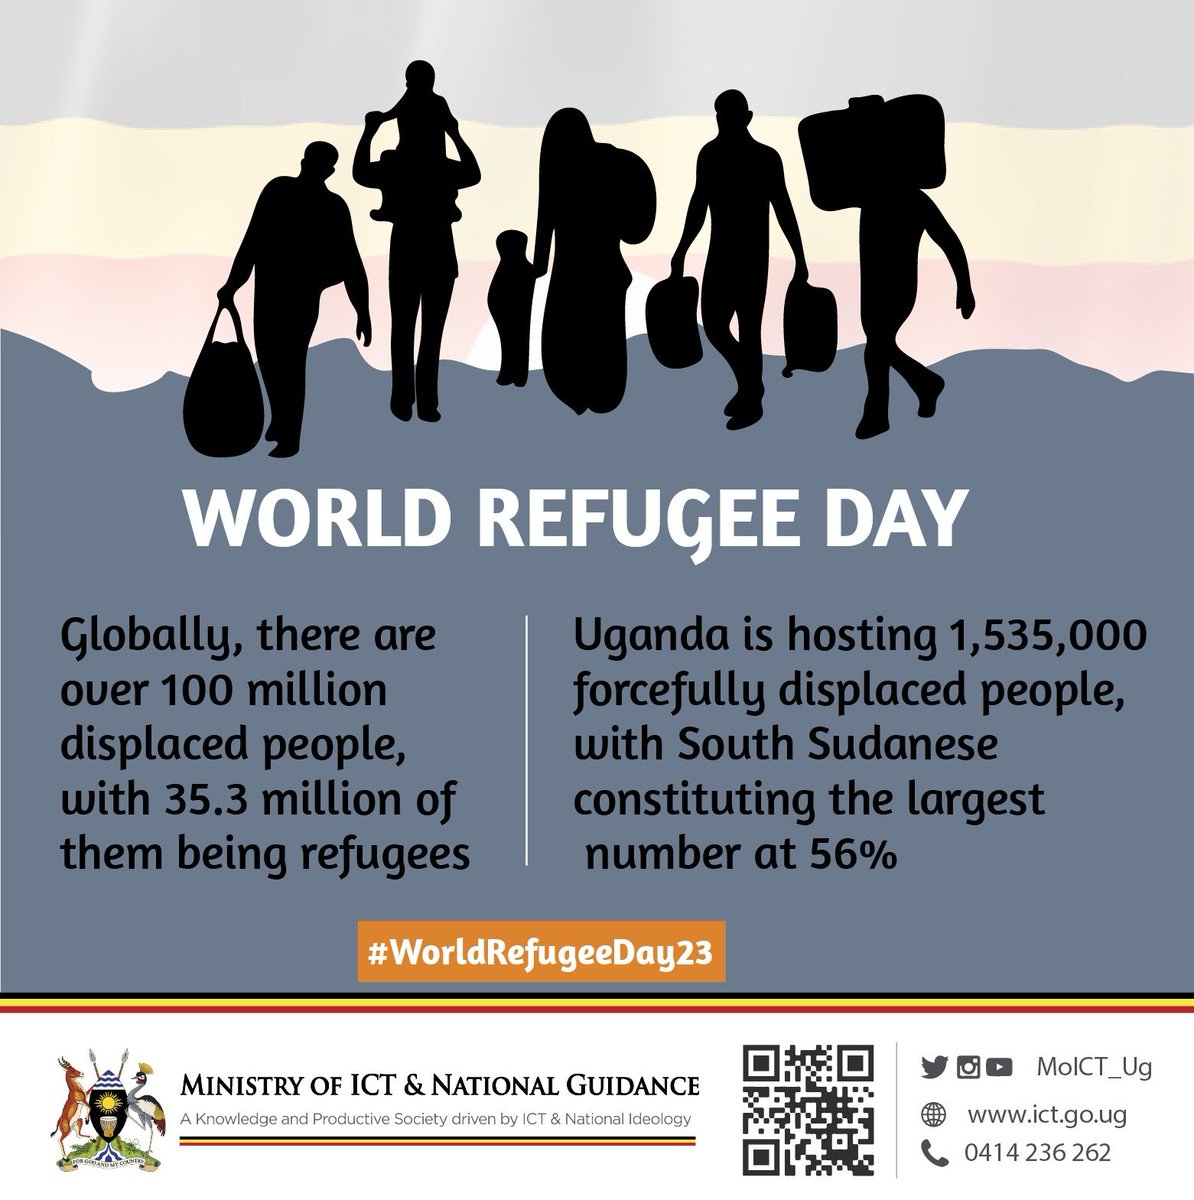 Let's pledge to support refugees in our communities more on this World Refugee Day. #WorldRefugeeDay2023